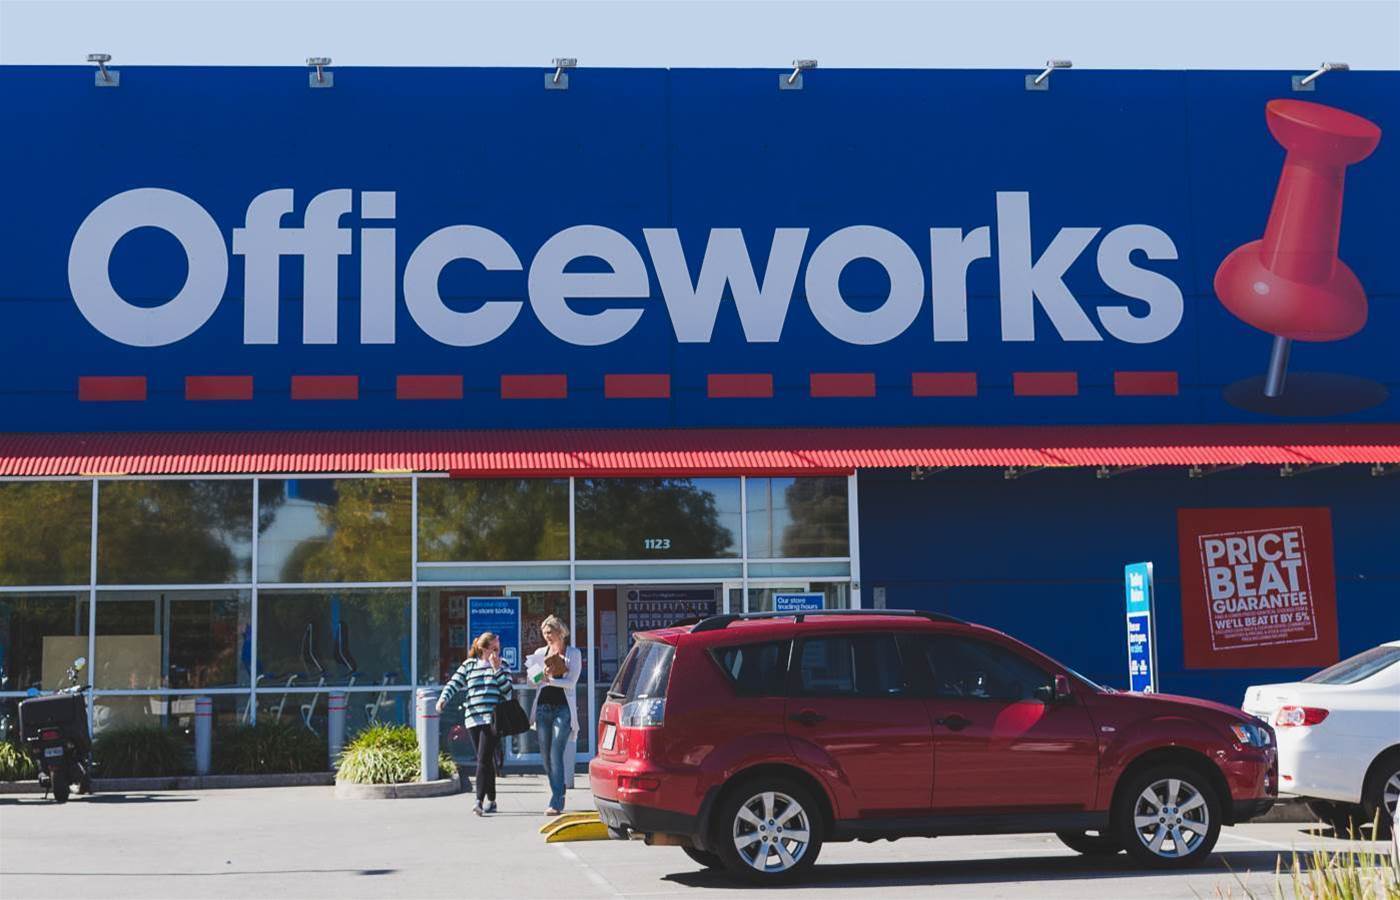 5Five Simply Smart - OfficeWorks